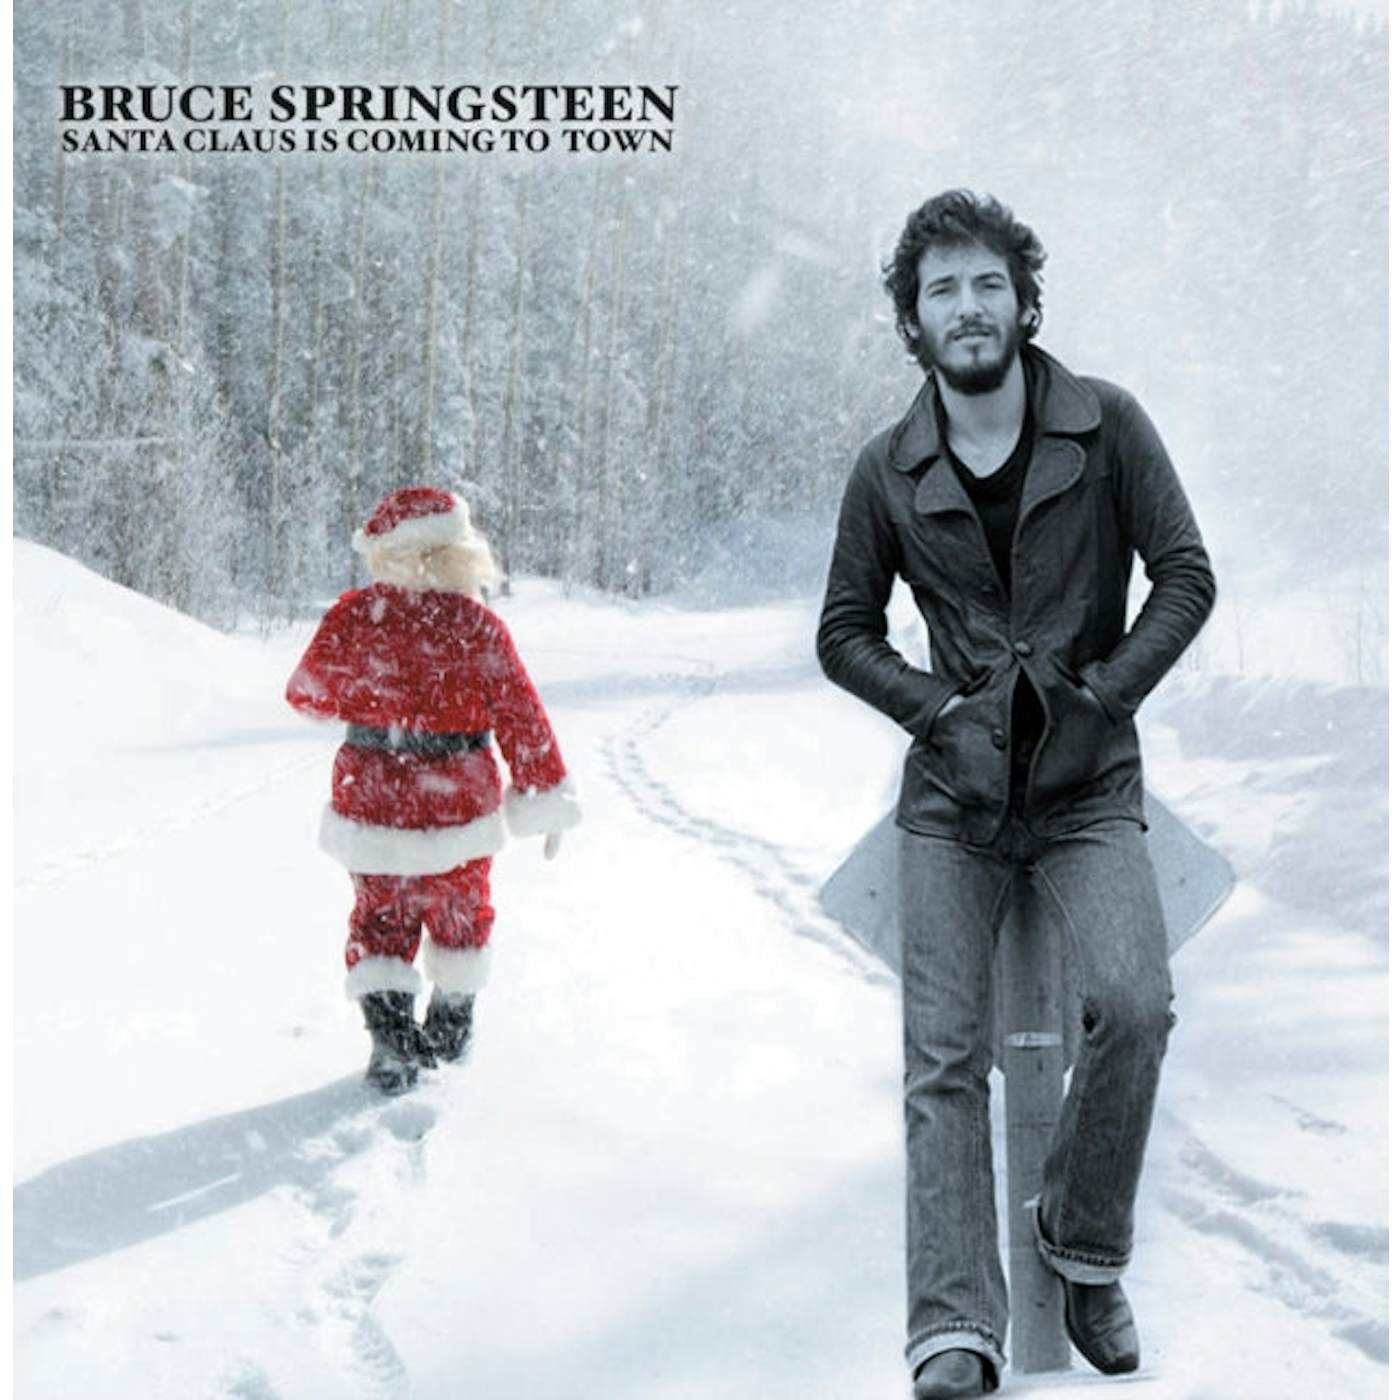 Bruce Springsteen LP Vinyl Record - Santa Claus Is Coming To Town (White Vinyl)